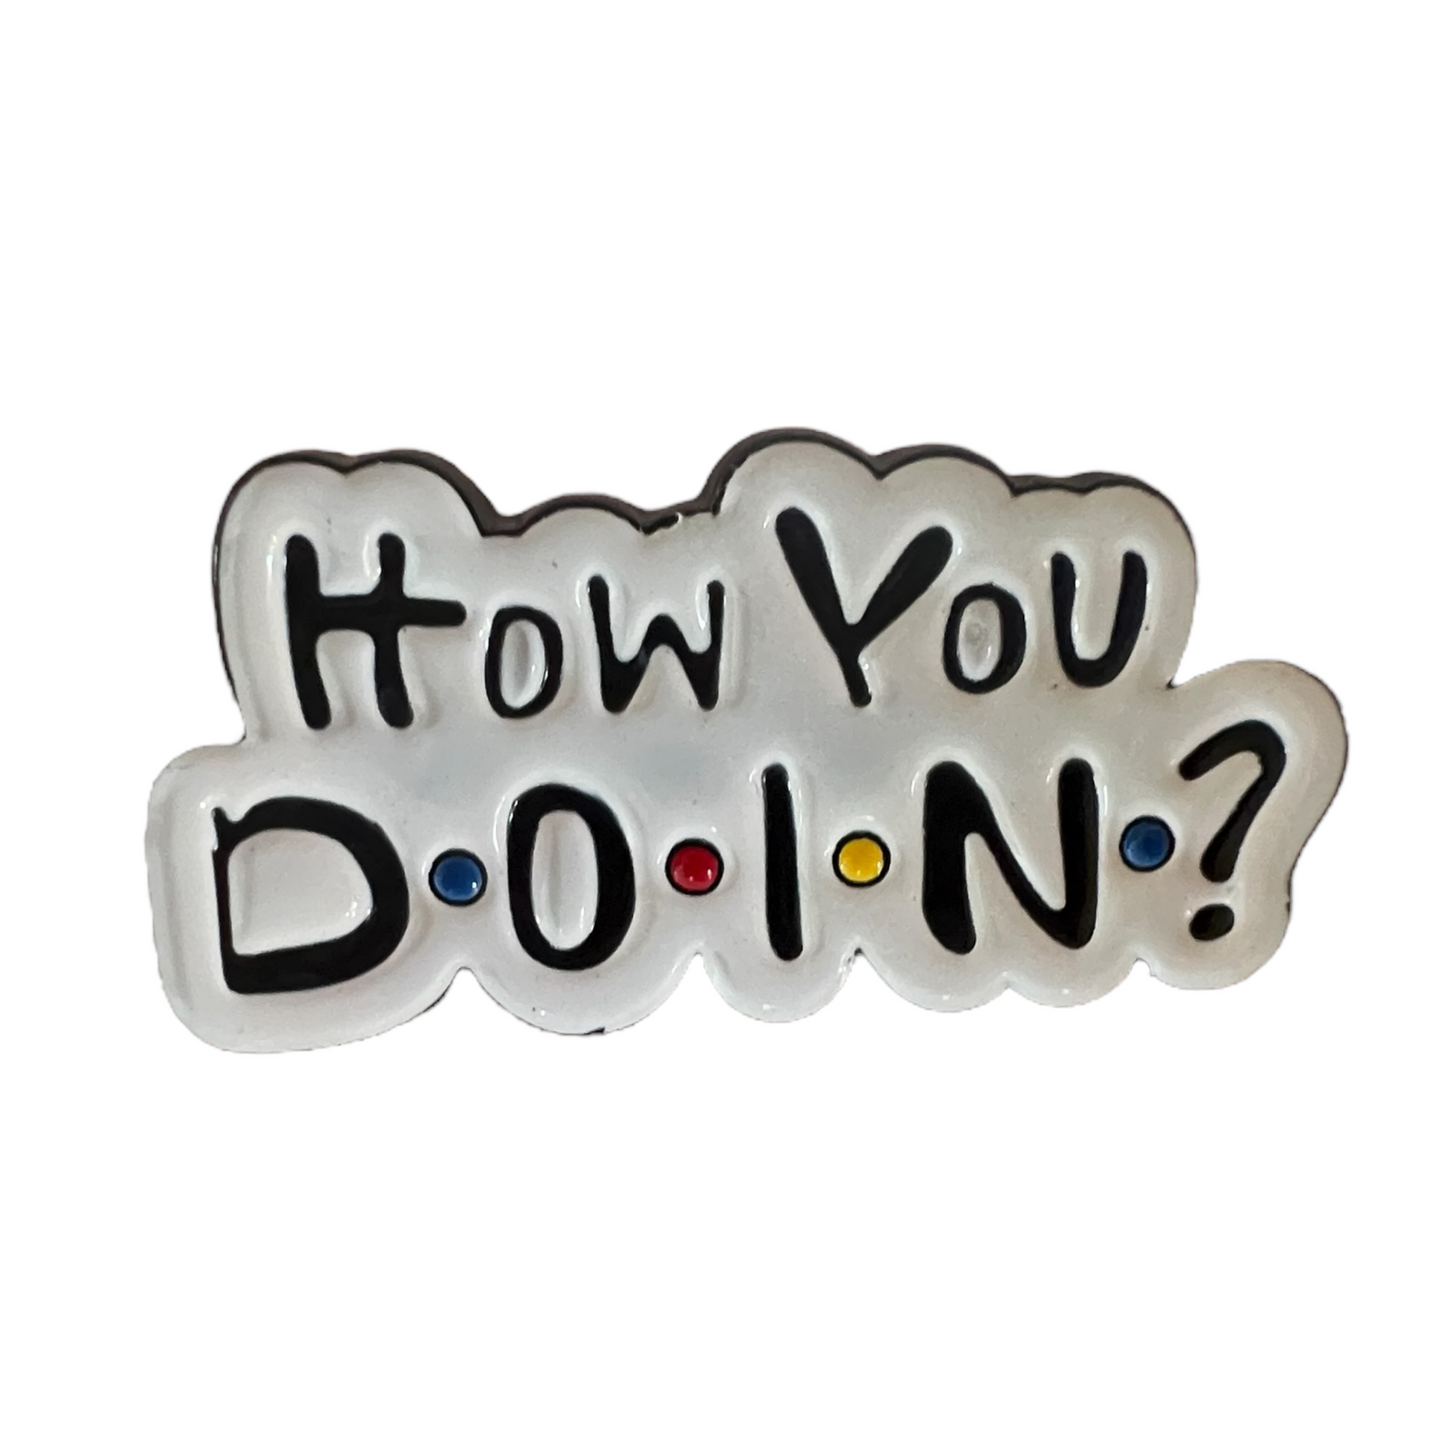 Pin — ‘Friends’ Edition Slogans  SPIRIT SPARKPLUGS “How you doin?”  